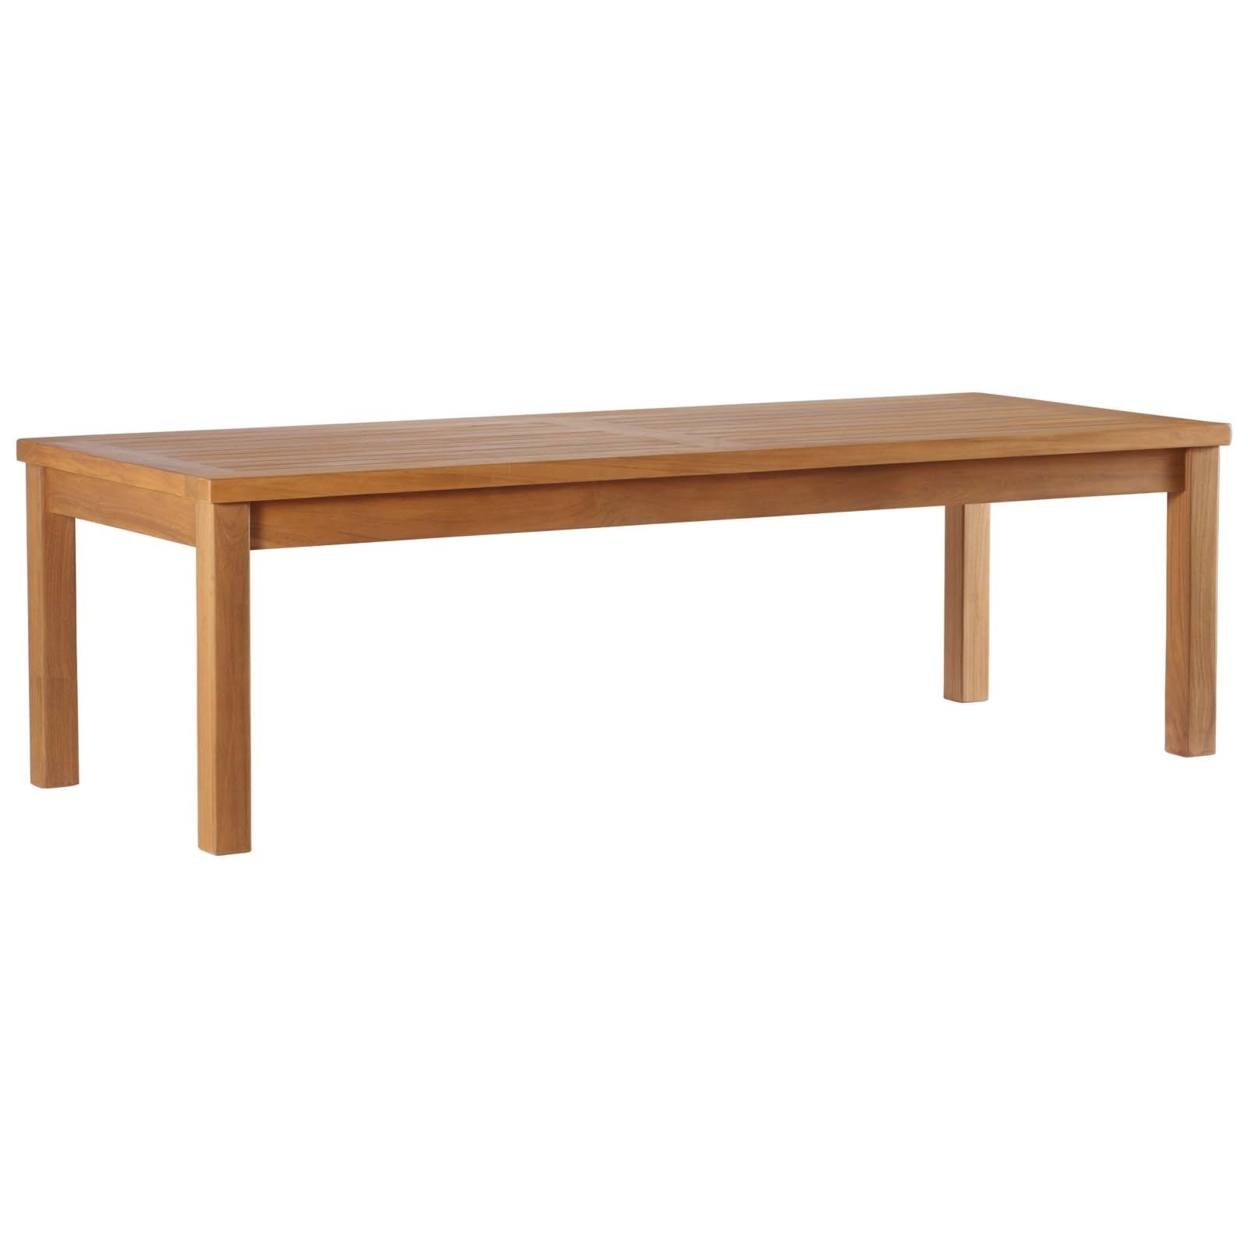 Upland Outdoor Patio Teak Wood Coffee Table, Natural